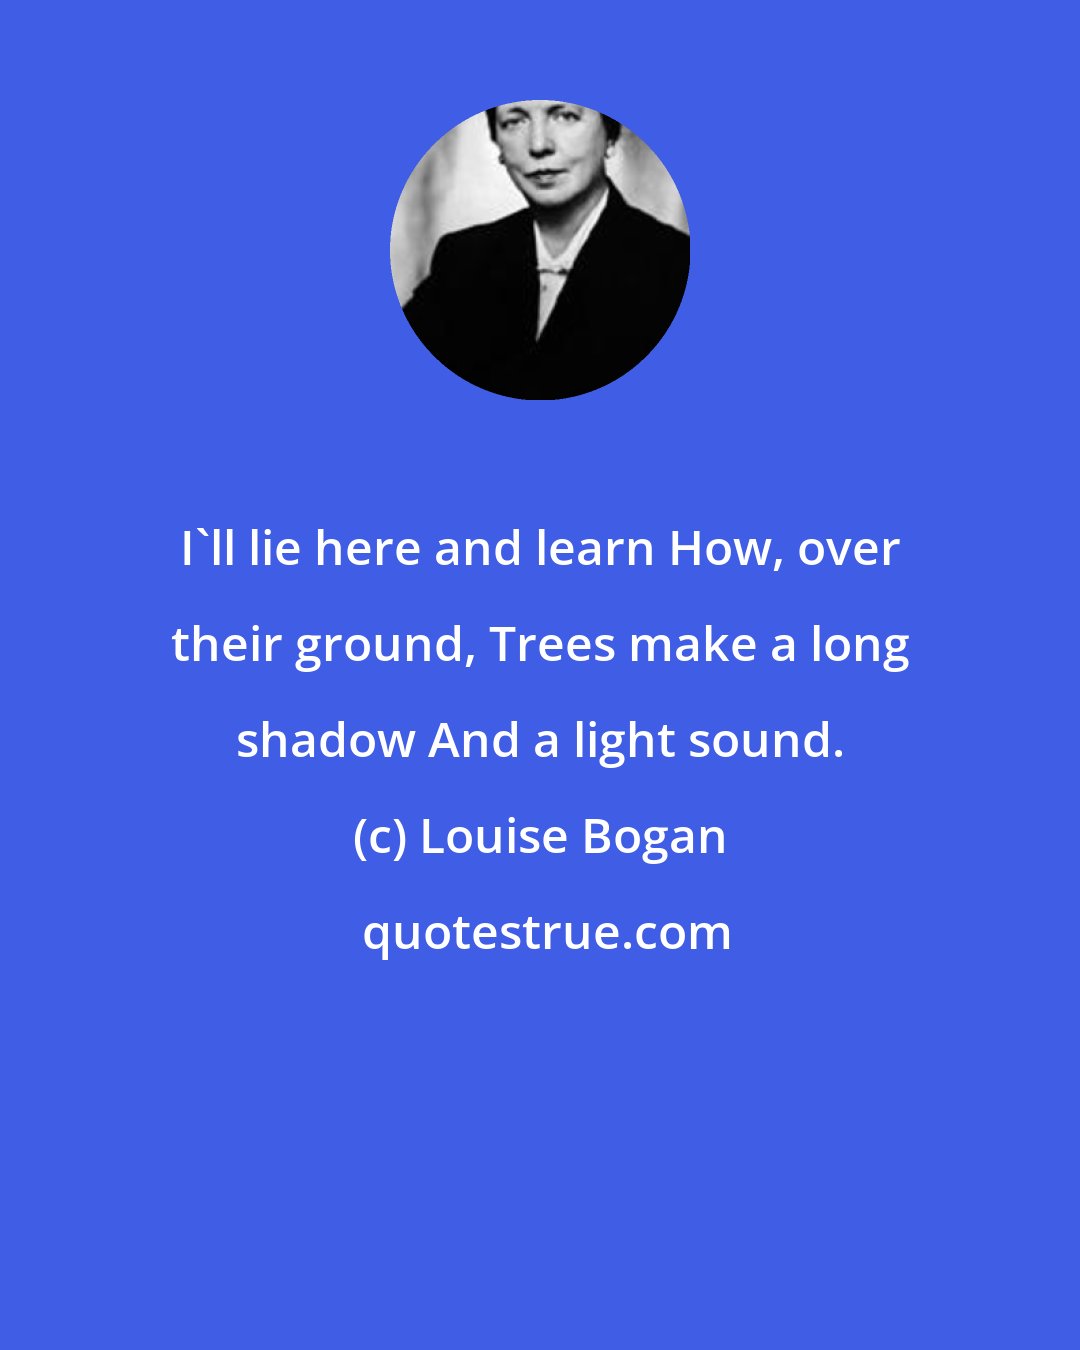 Louise Bogan: I'll lie here and learn How, over their ground, Trees make a long shadow And a light sound.